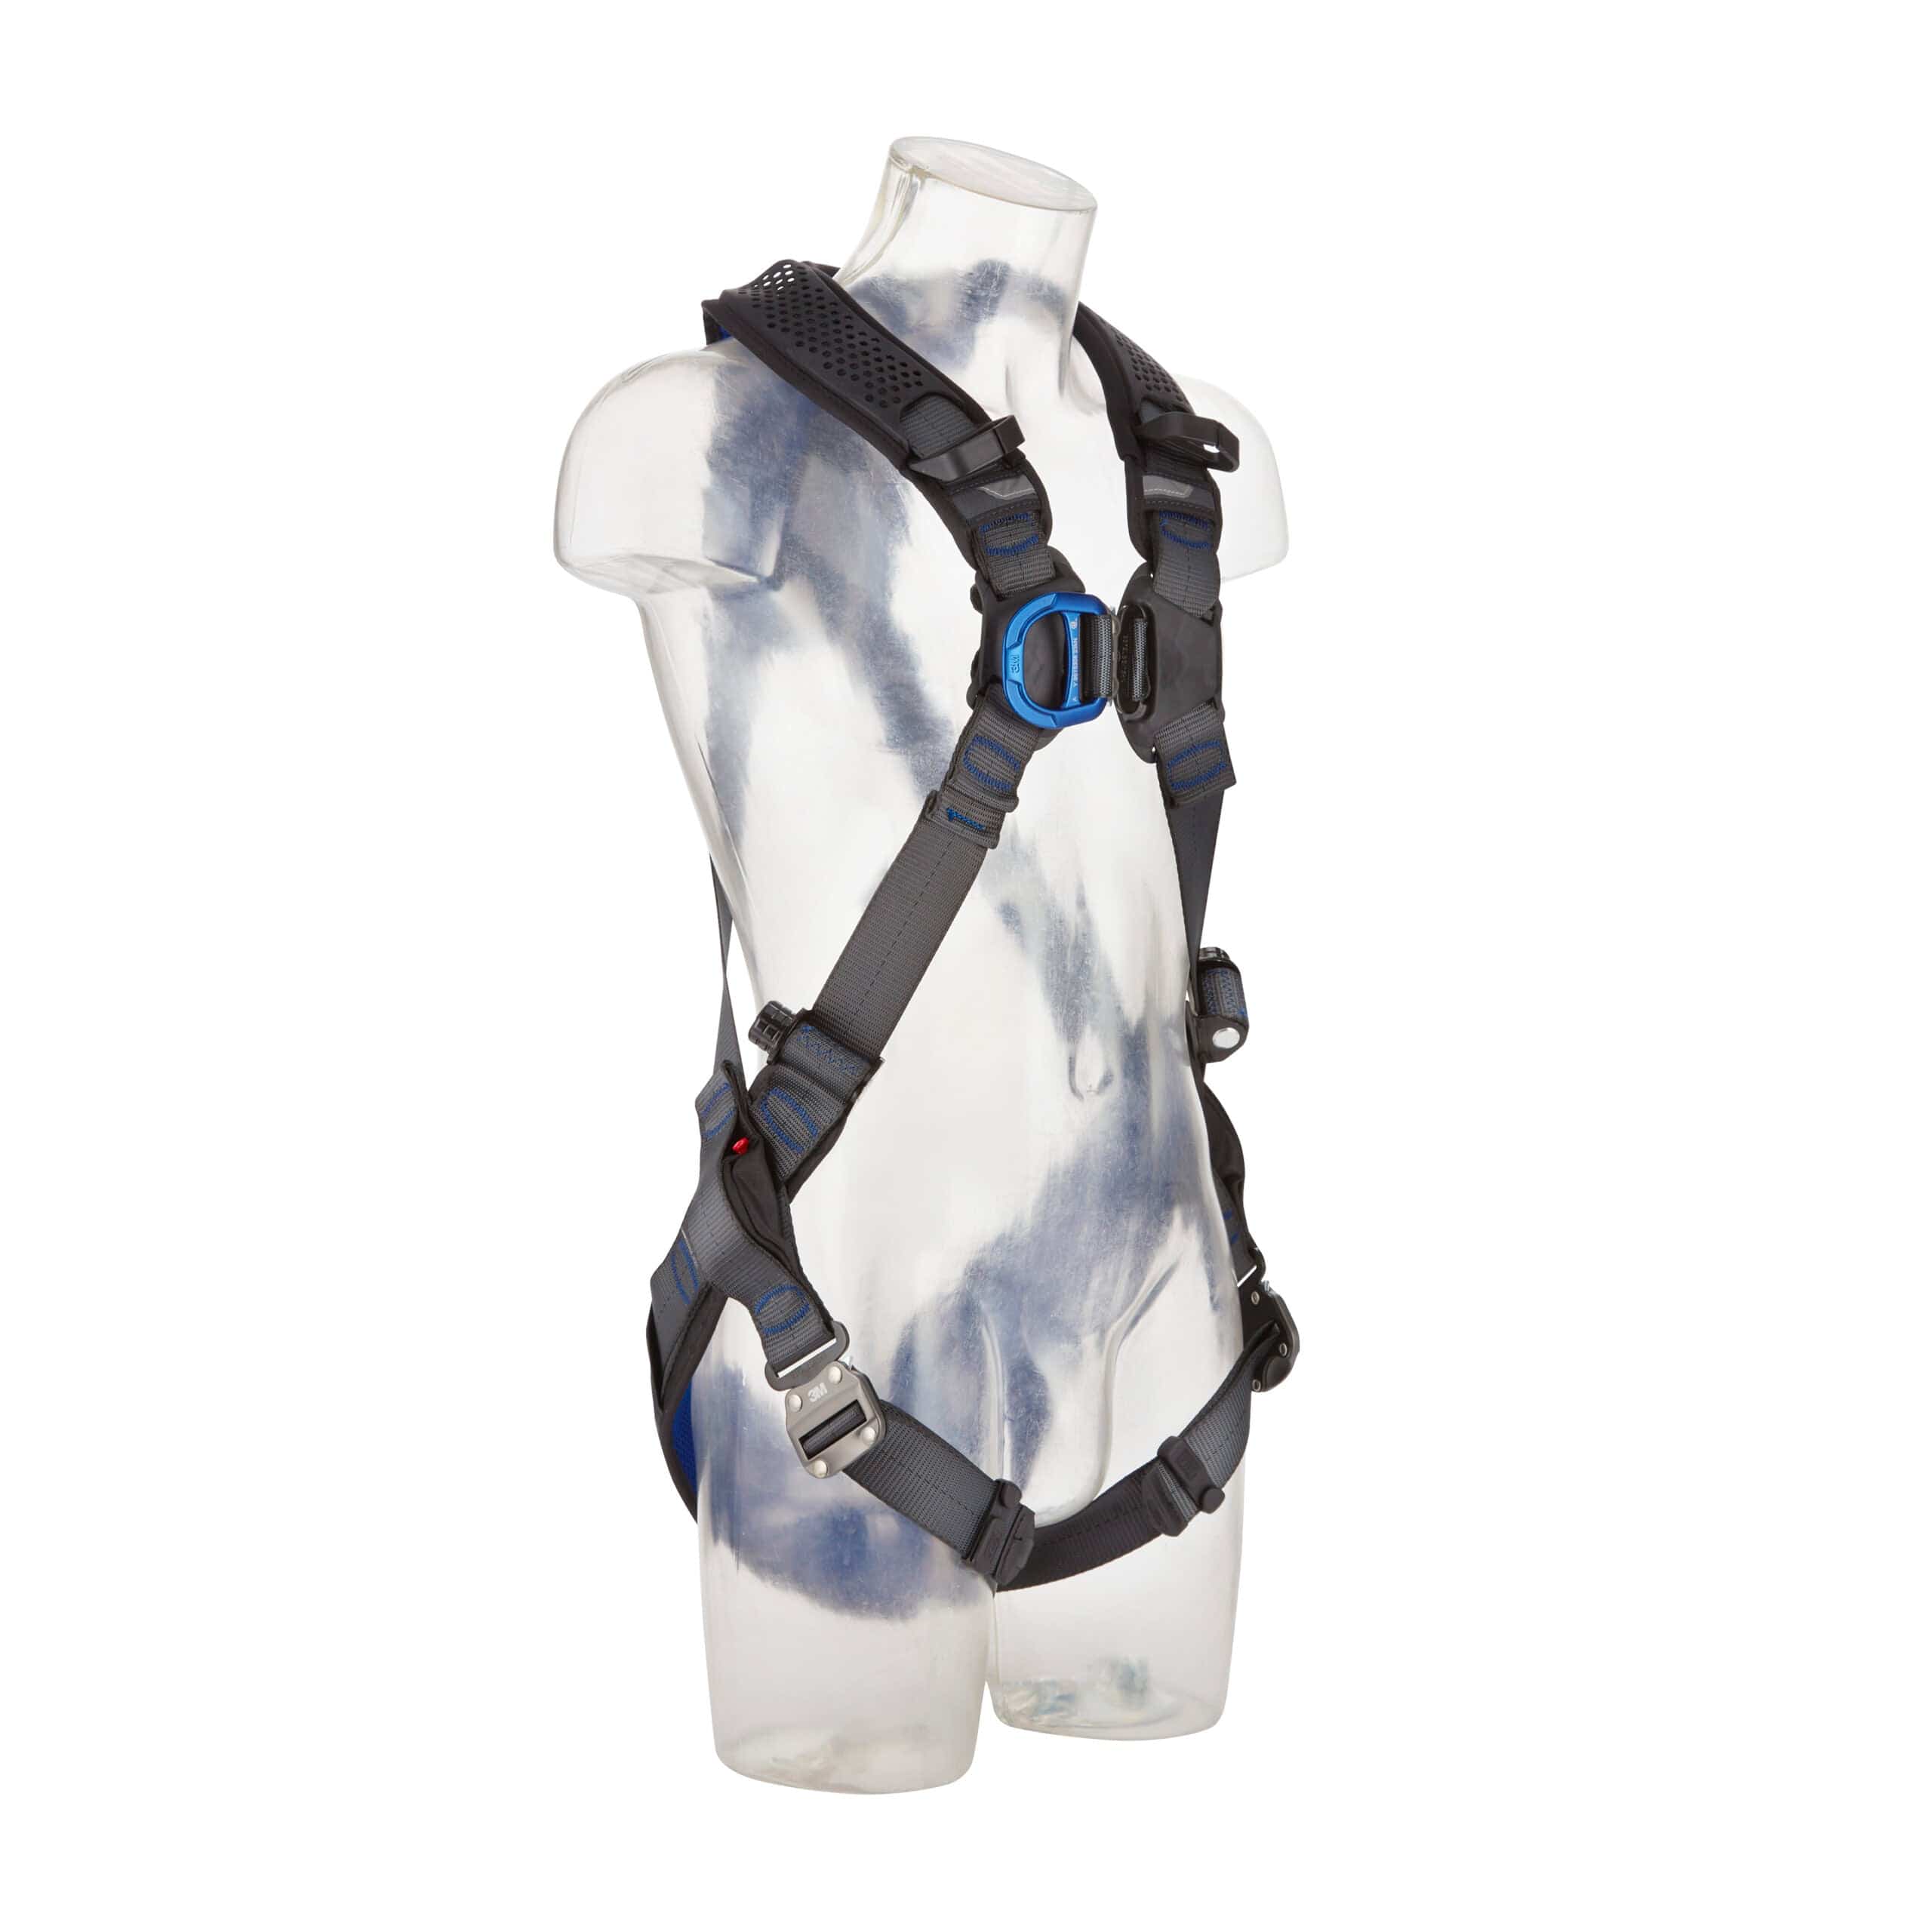 3M DBI SALA ExoFit XE200 Comfort Safety Harness - SecureHeights